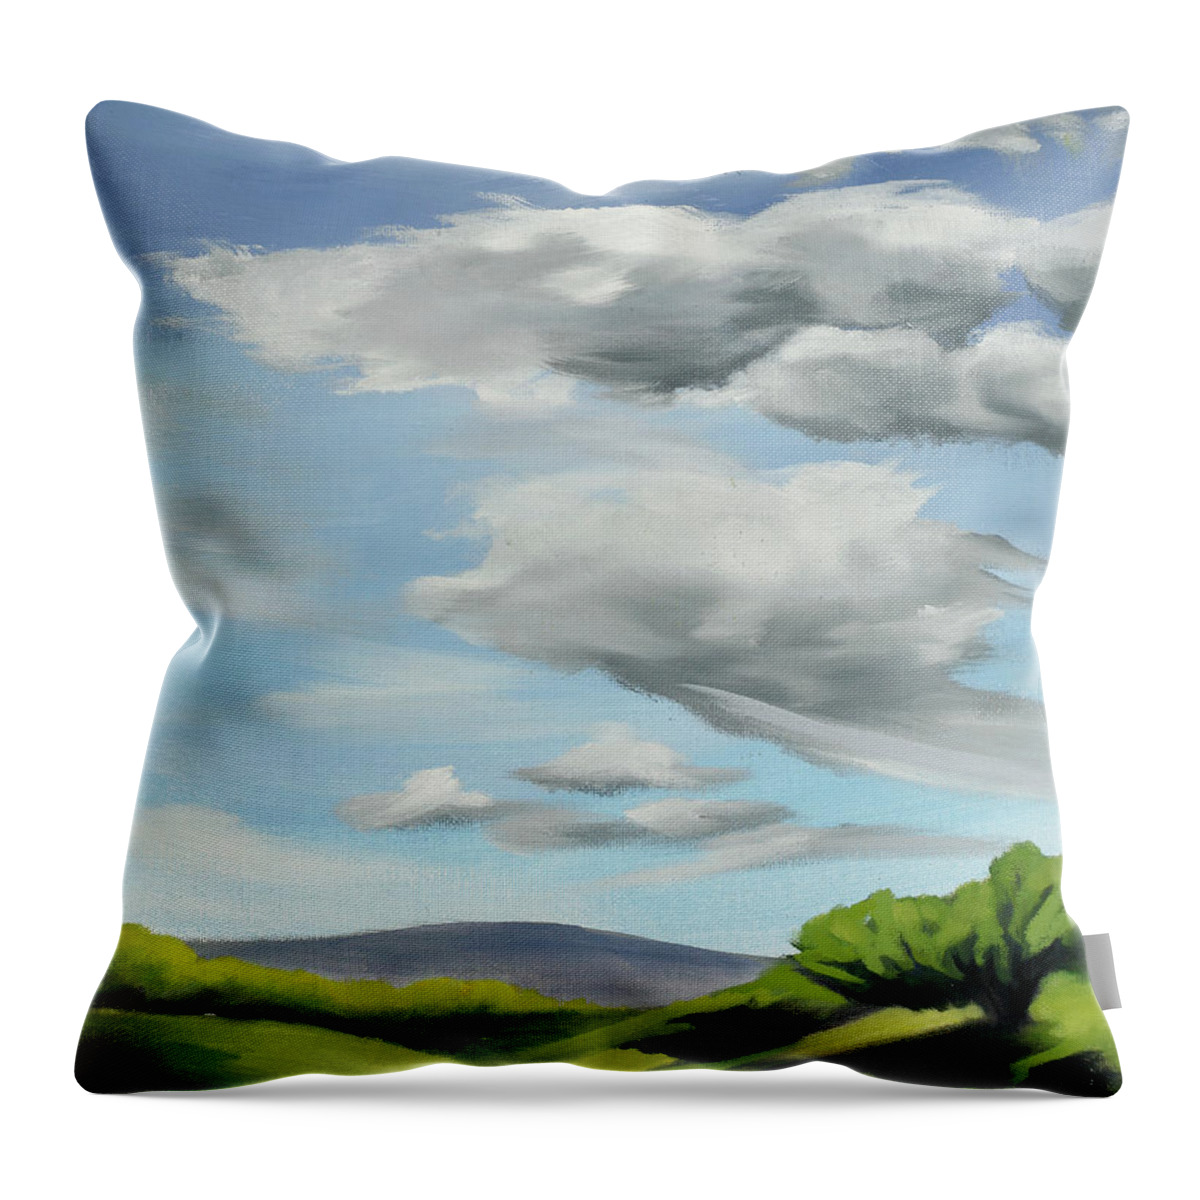 Landscape Throw Pillow featuring the painting Afternoon Clouds by Sandi Snead